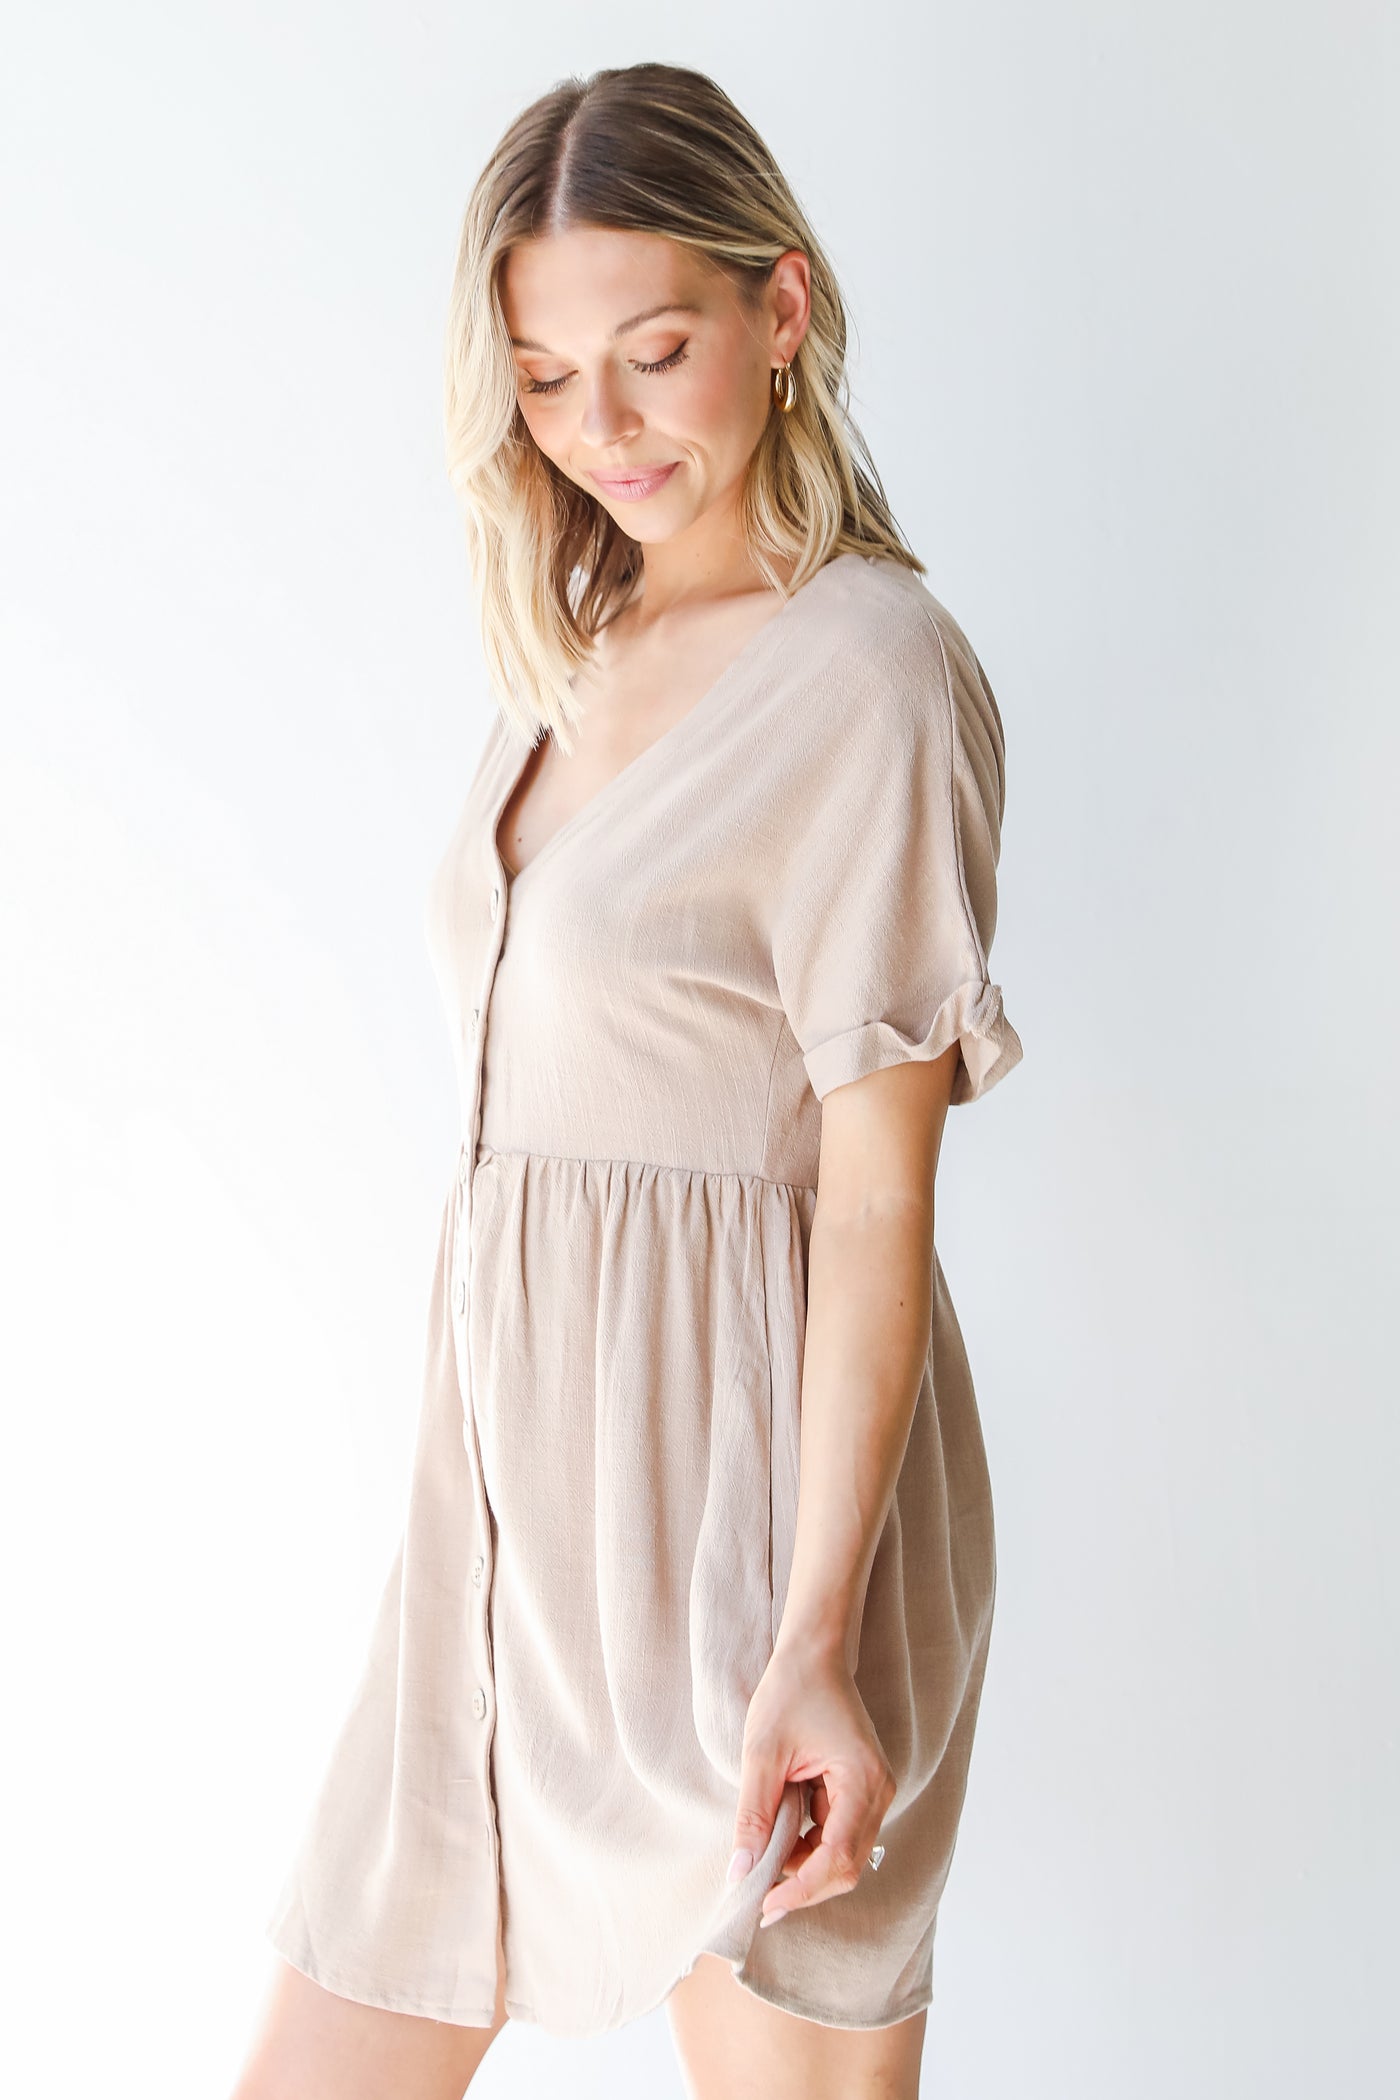 Linen Babydoll Dress in taupe side view